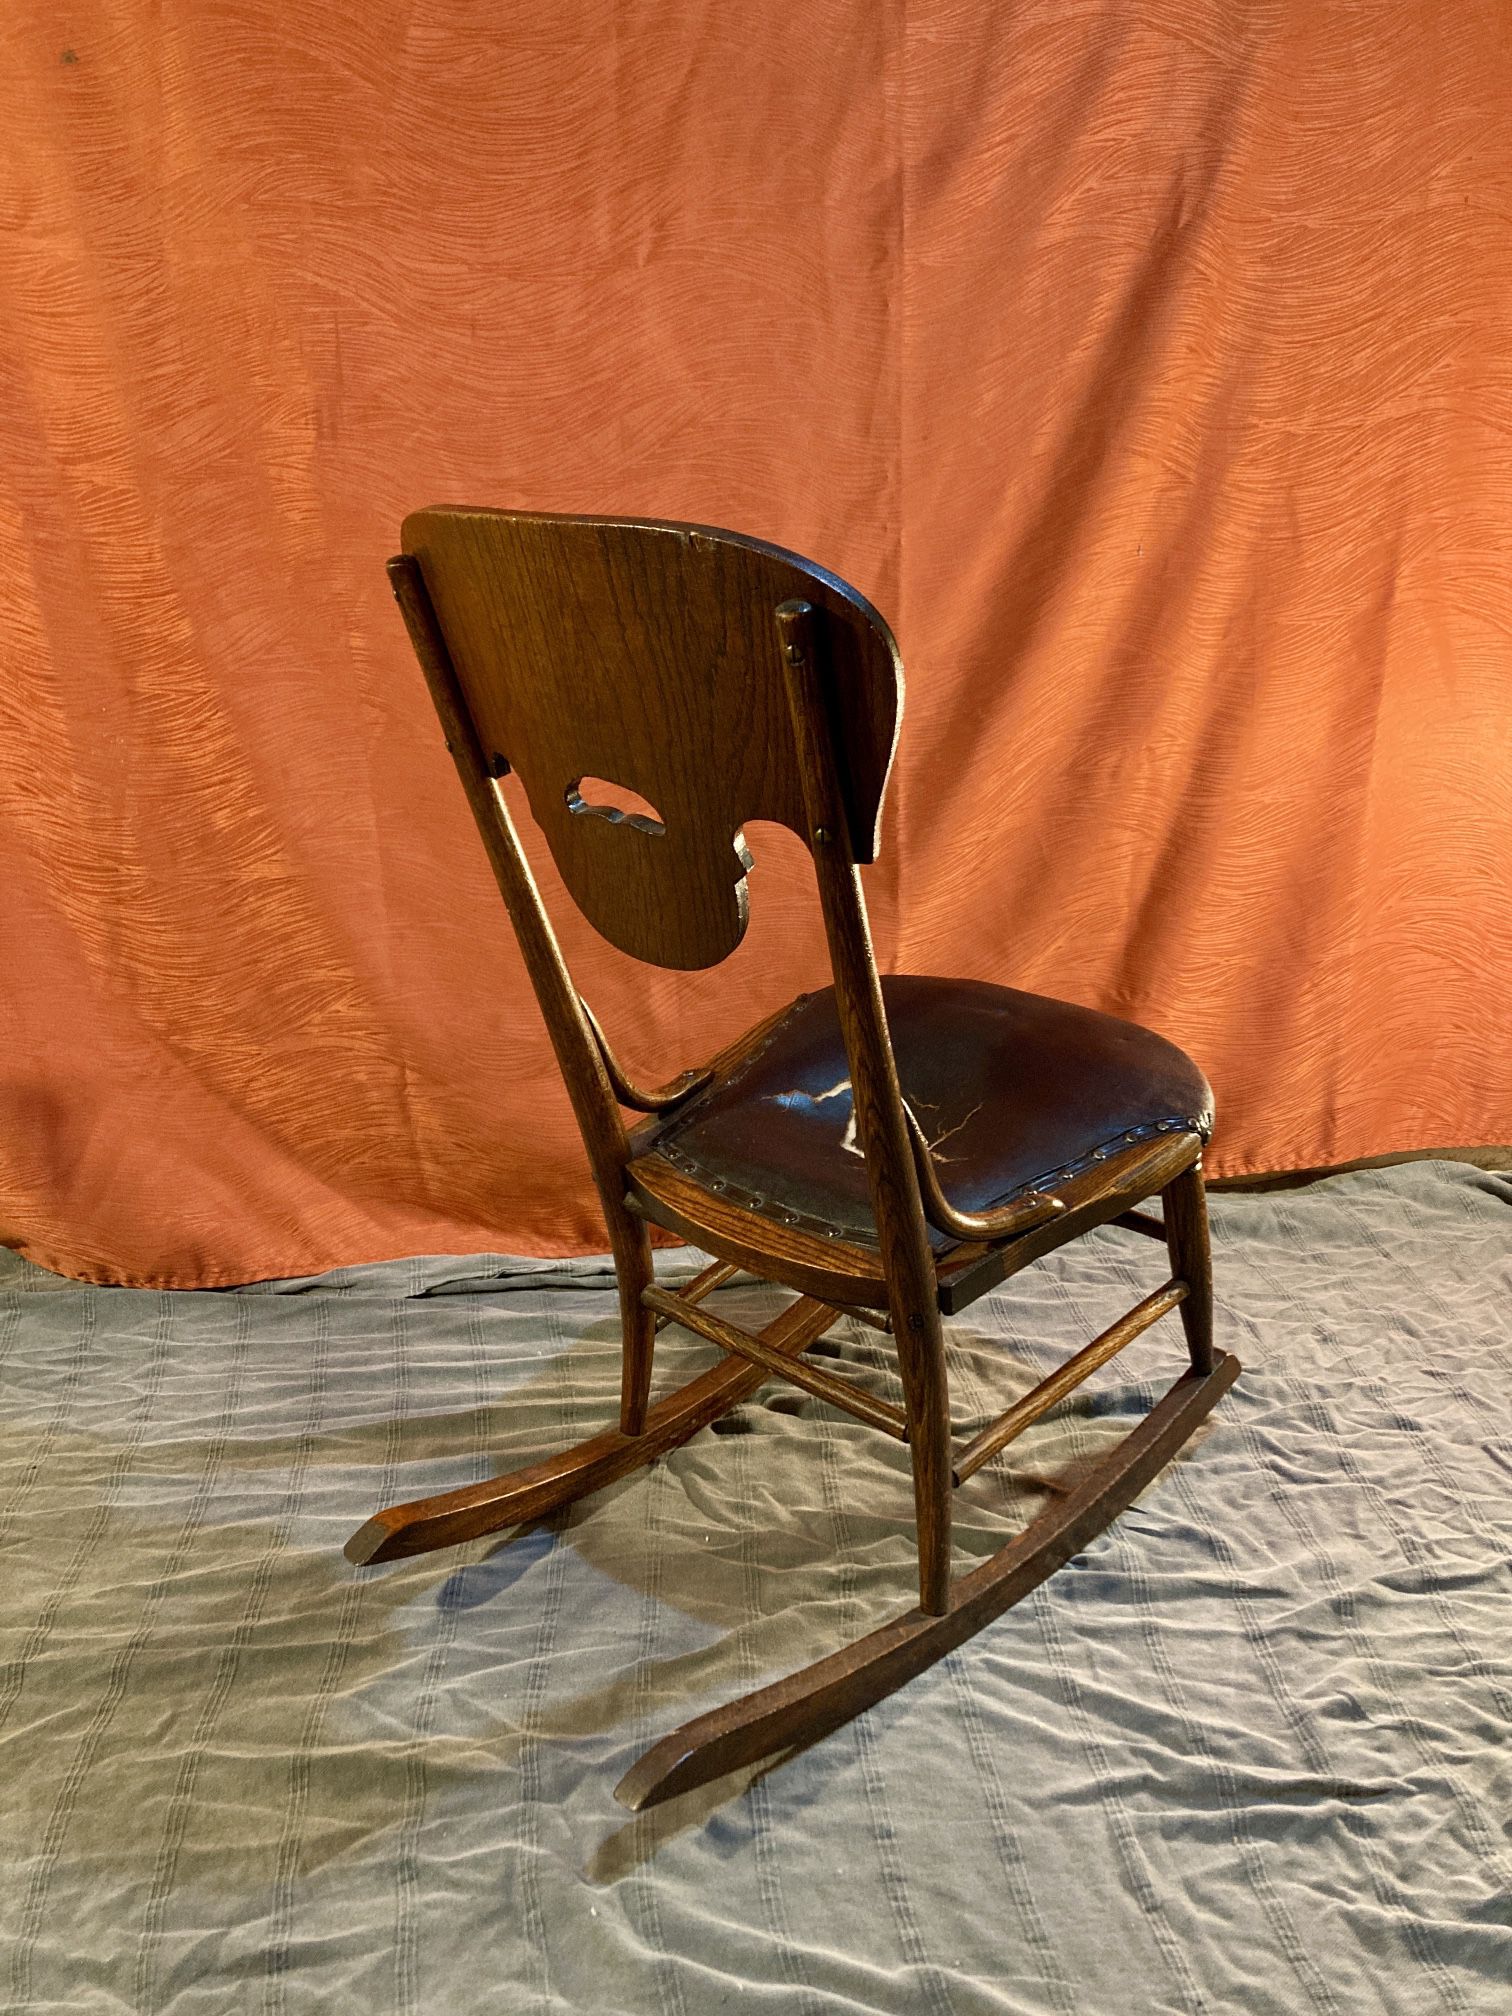 Lovely Little Wood Rocking Chair 